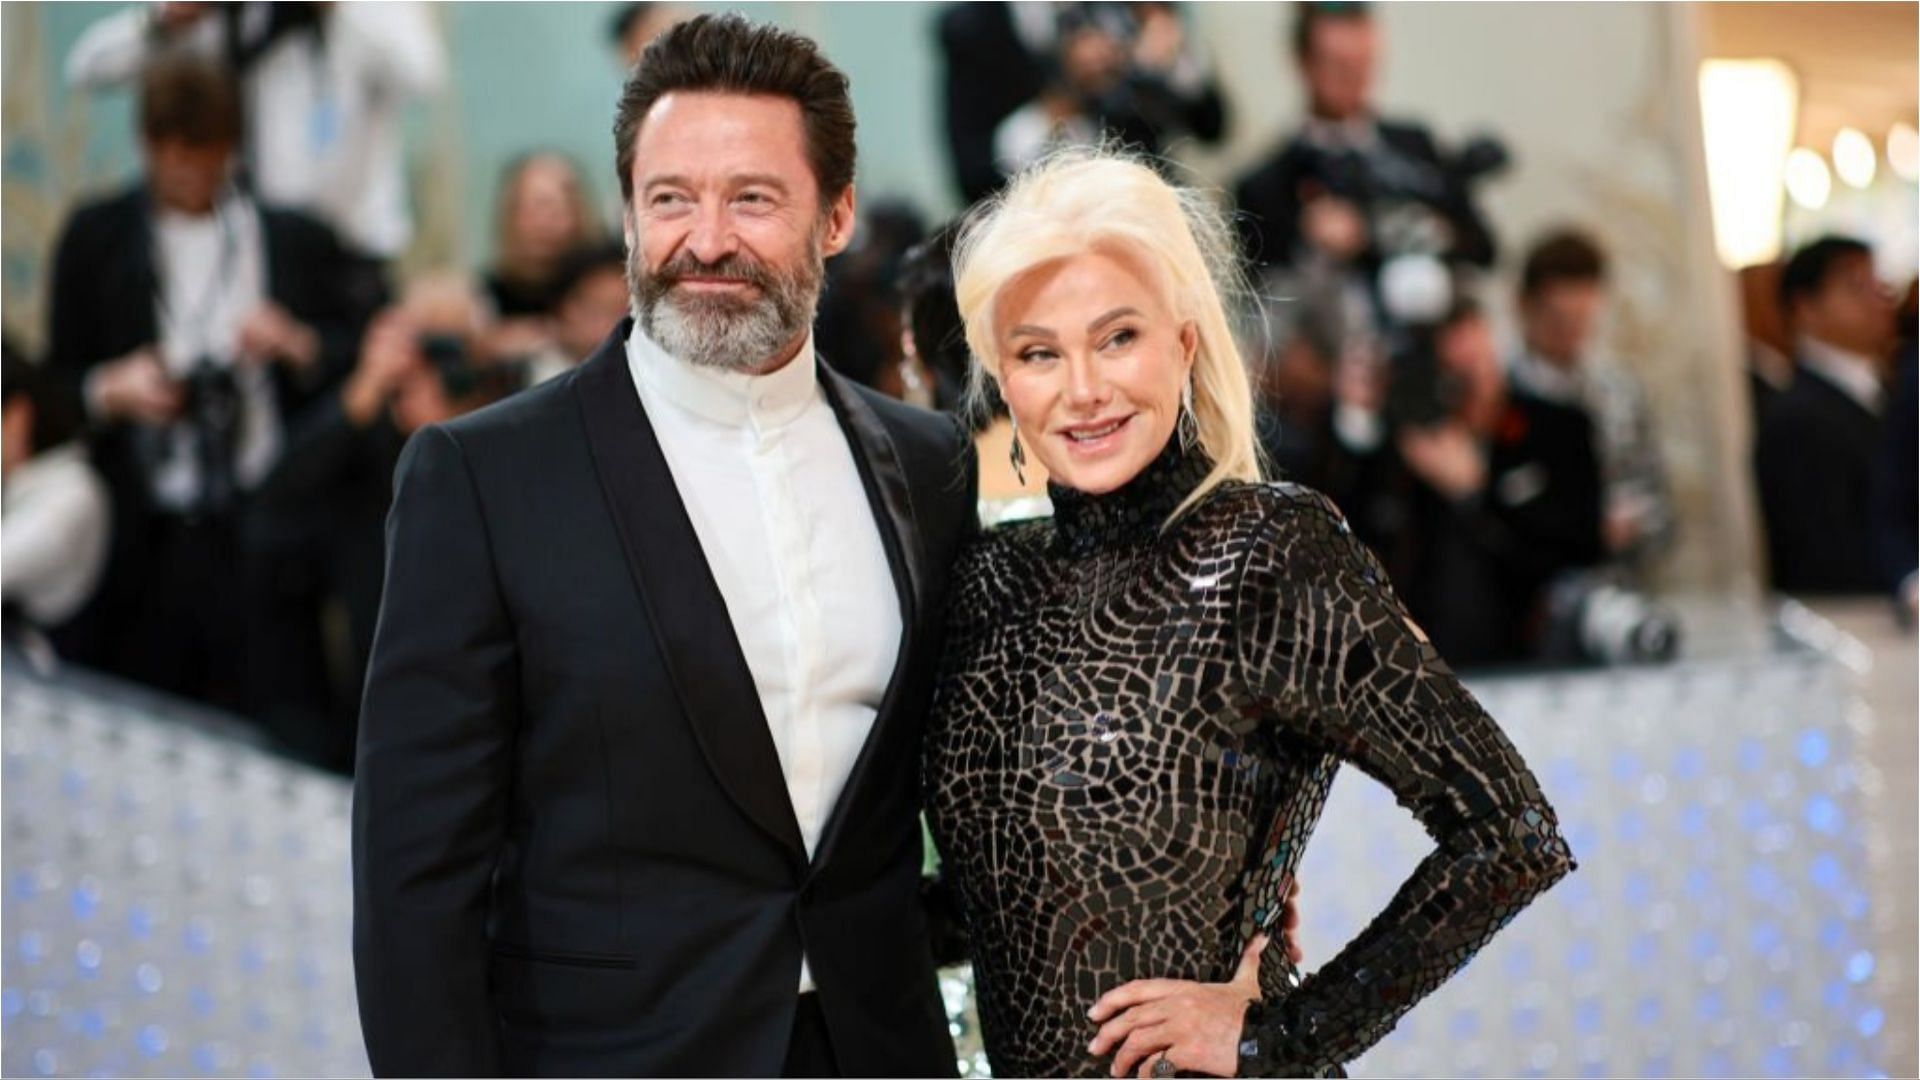 Hugh Jackman and Deborra-Lee Furness have separated after being married since 1996 (Image via Dimitrios Kambouris/Getty Images)